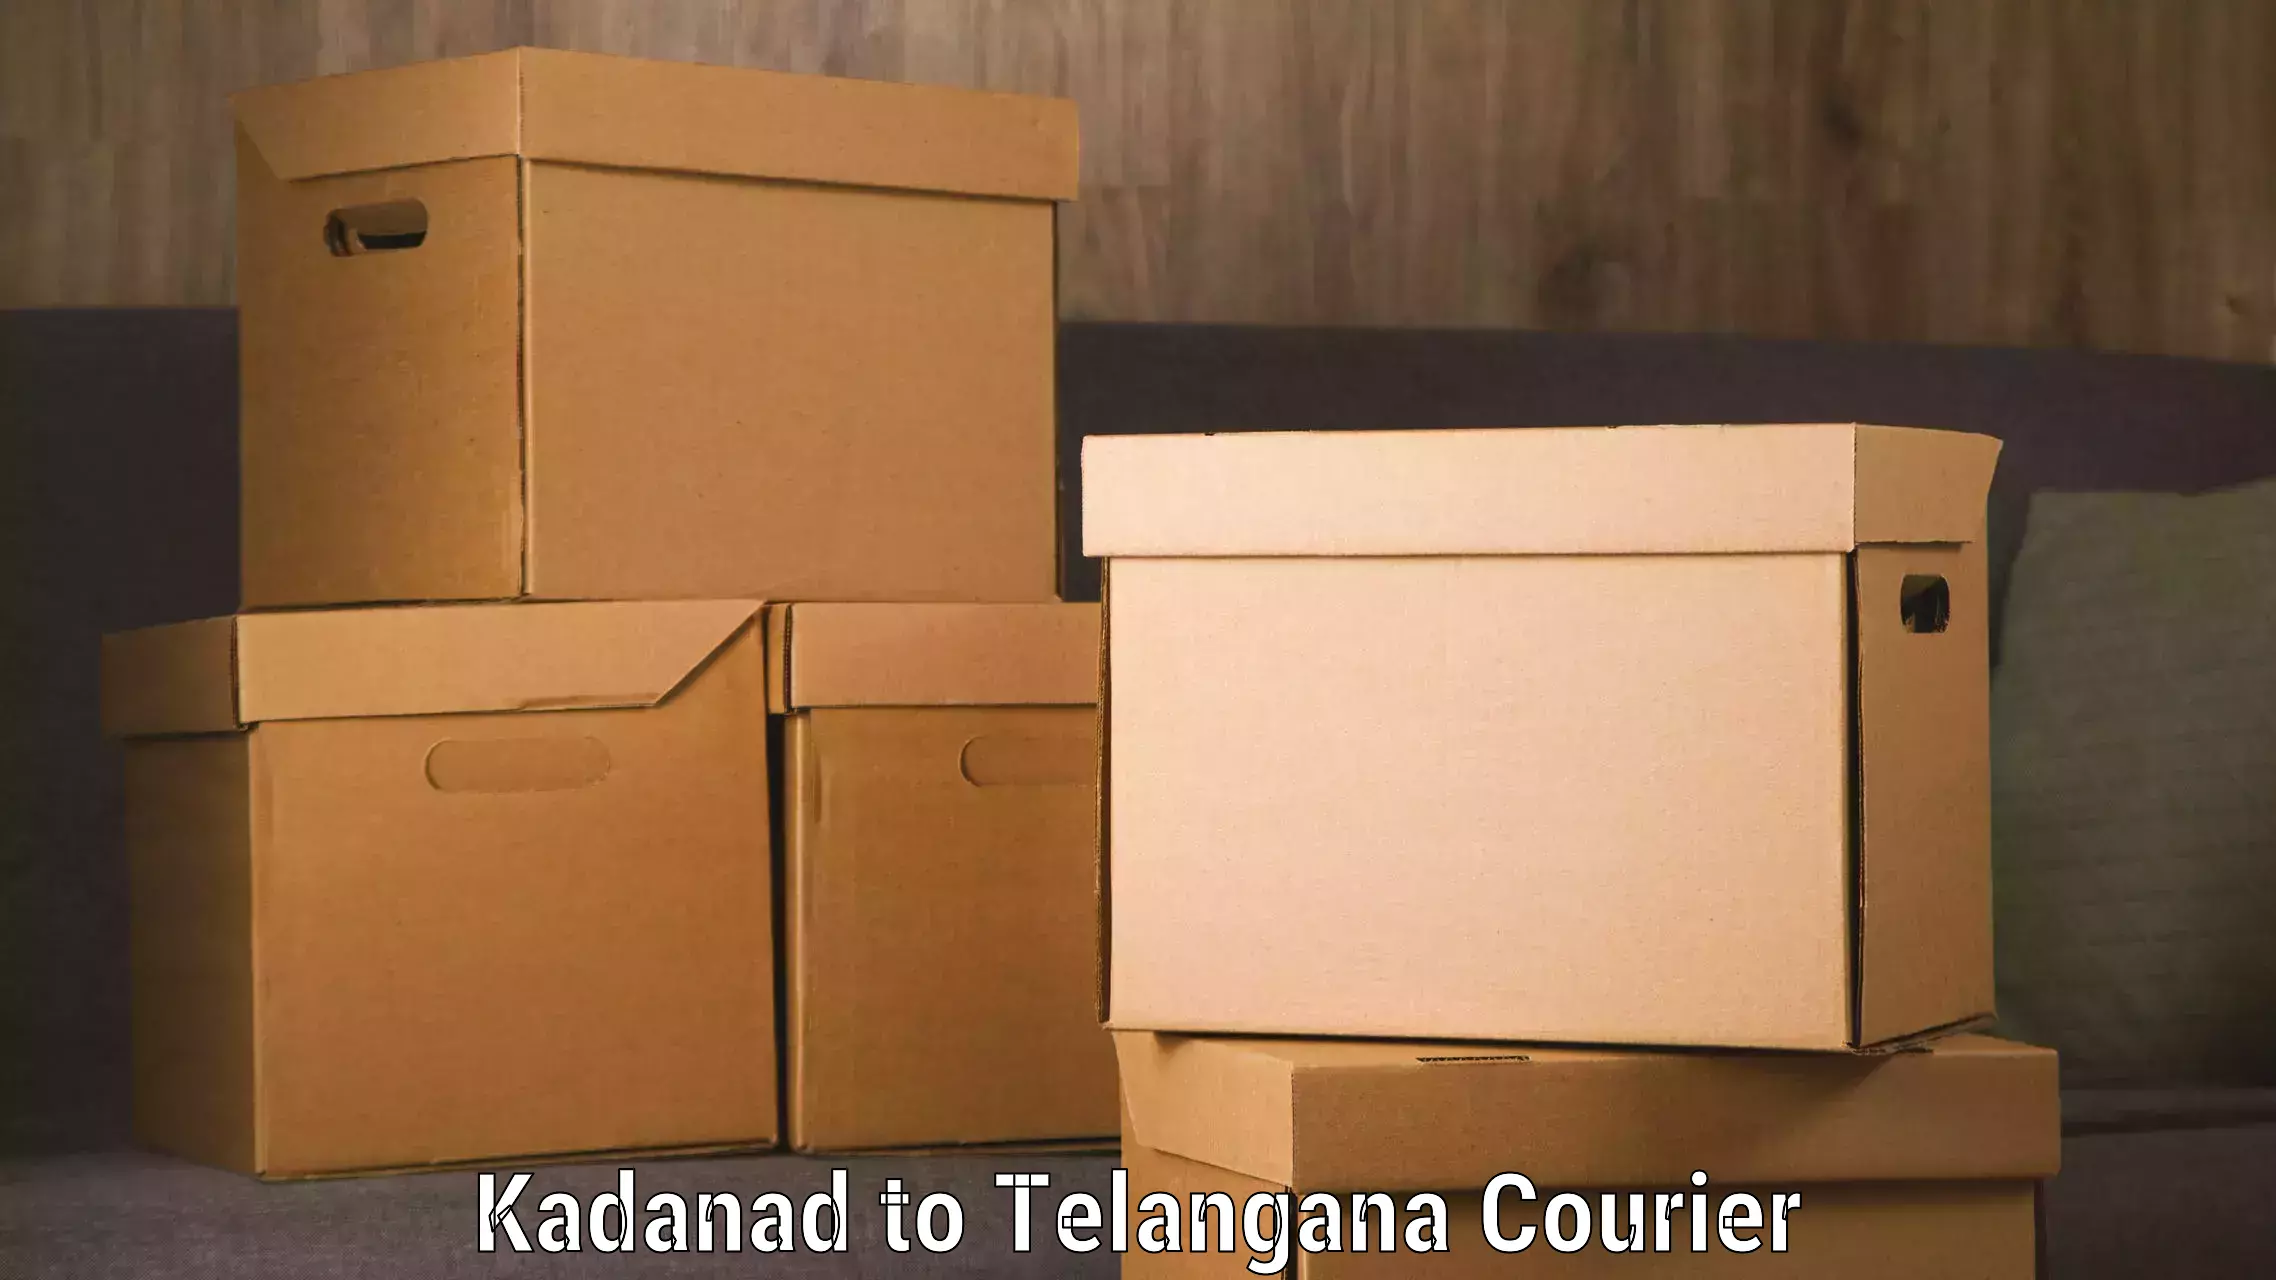 State-of-the-art courier technology Kadanad to Cherial